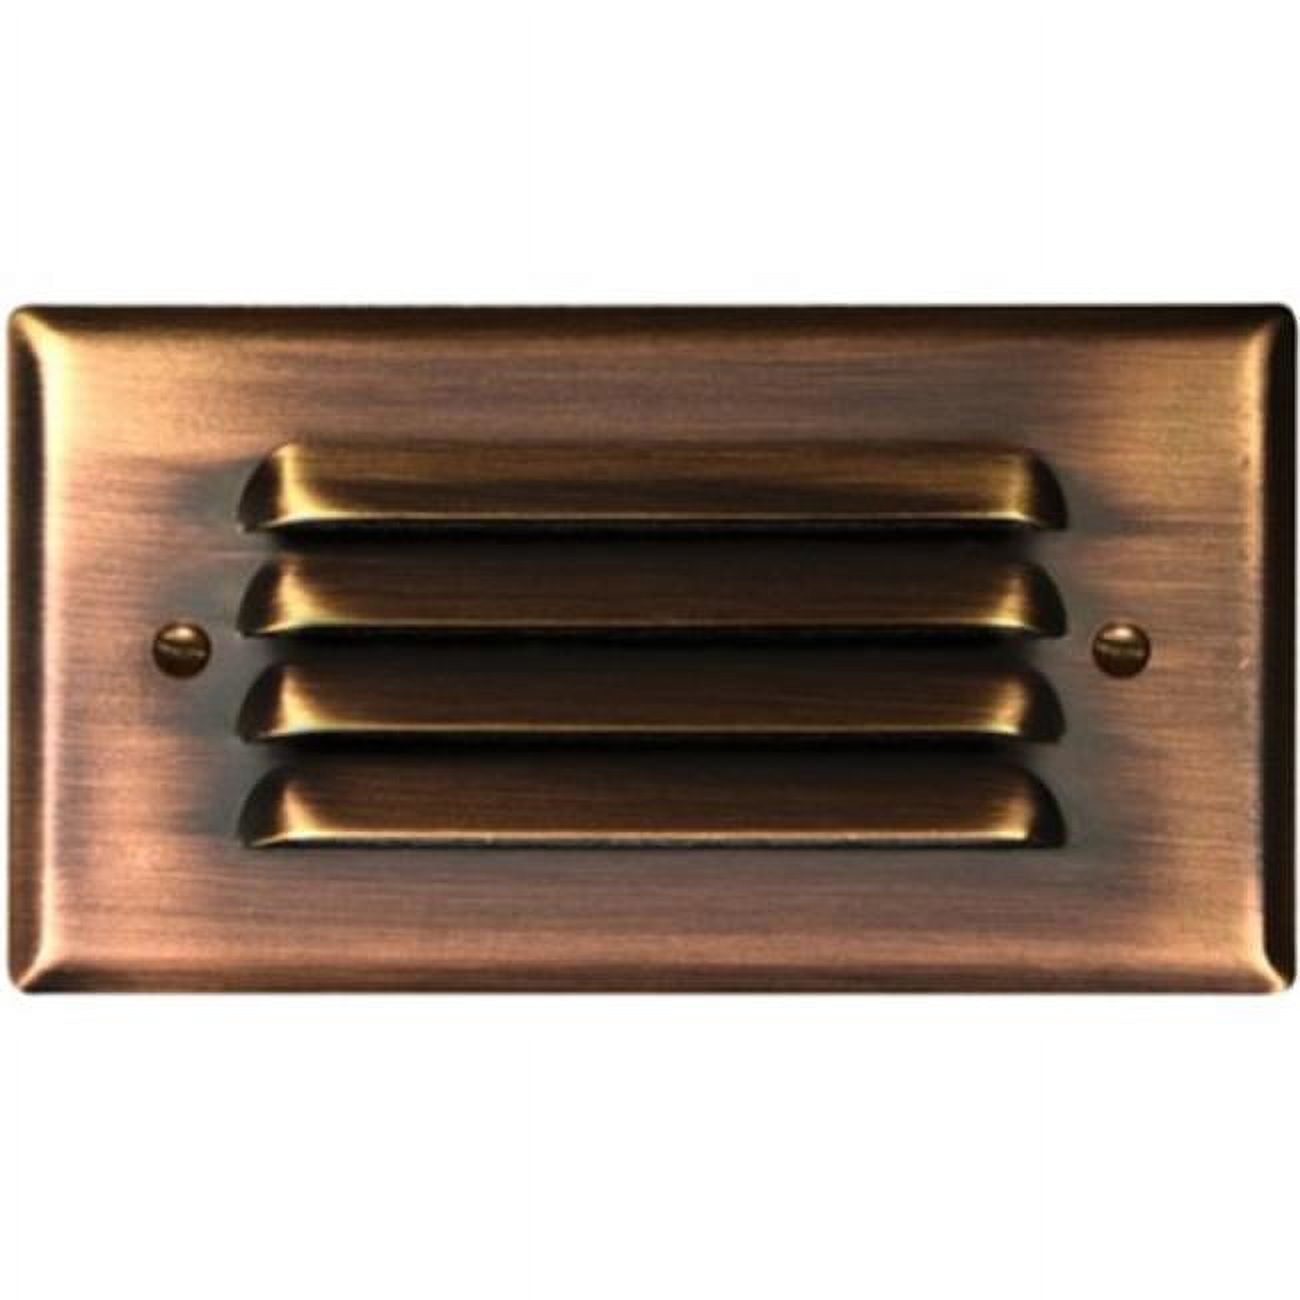 Dabmar Lighting  3.2W & 12V Bay-LED Recessed Louvered Down Brick - Step & Wall Fixture - Antique Bronze Cover - image 1 of 1